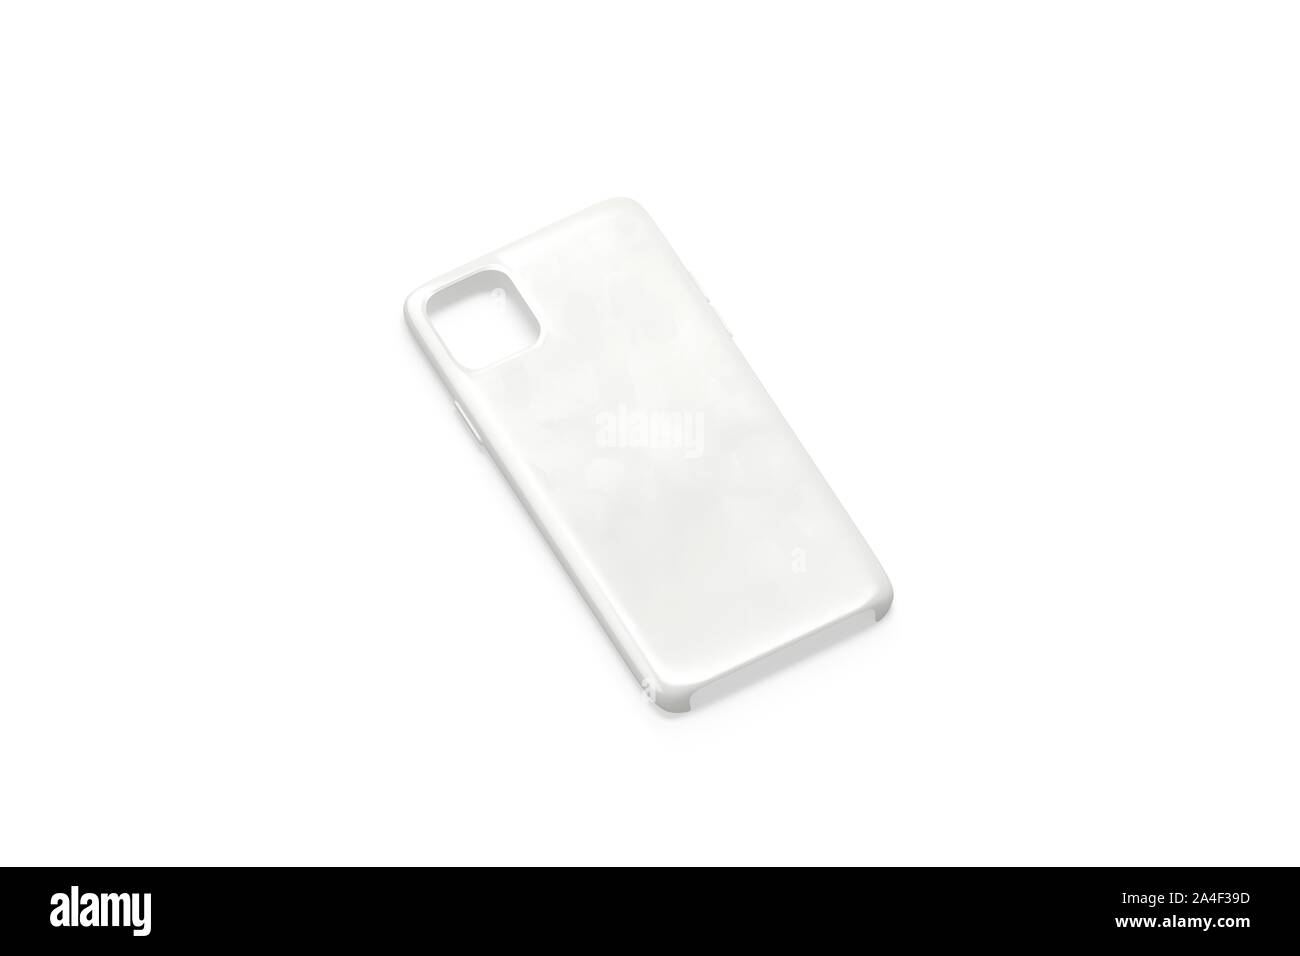 Blank white phone case mock up, side view Stock Photo